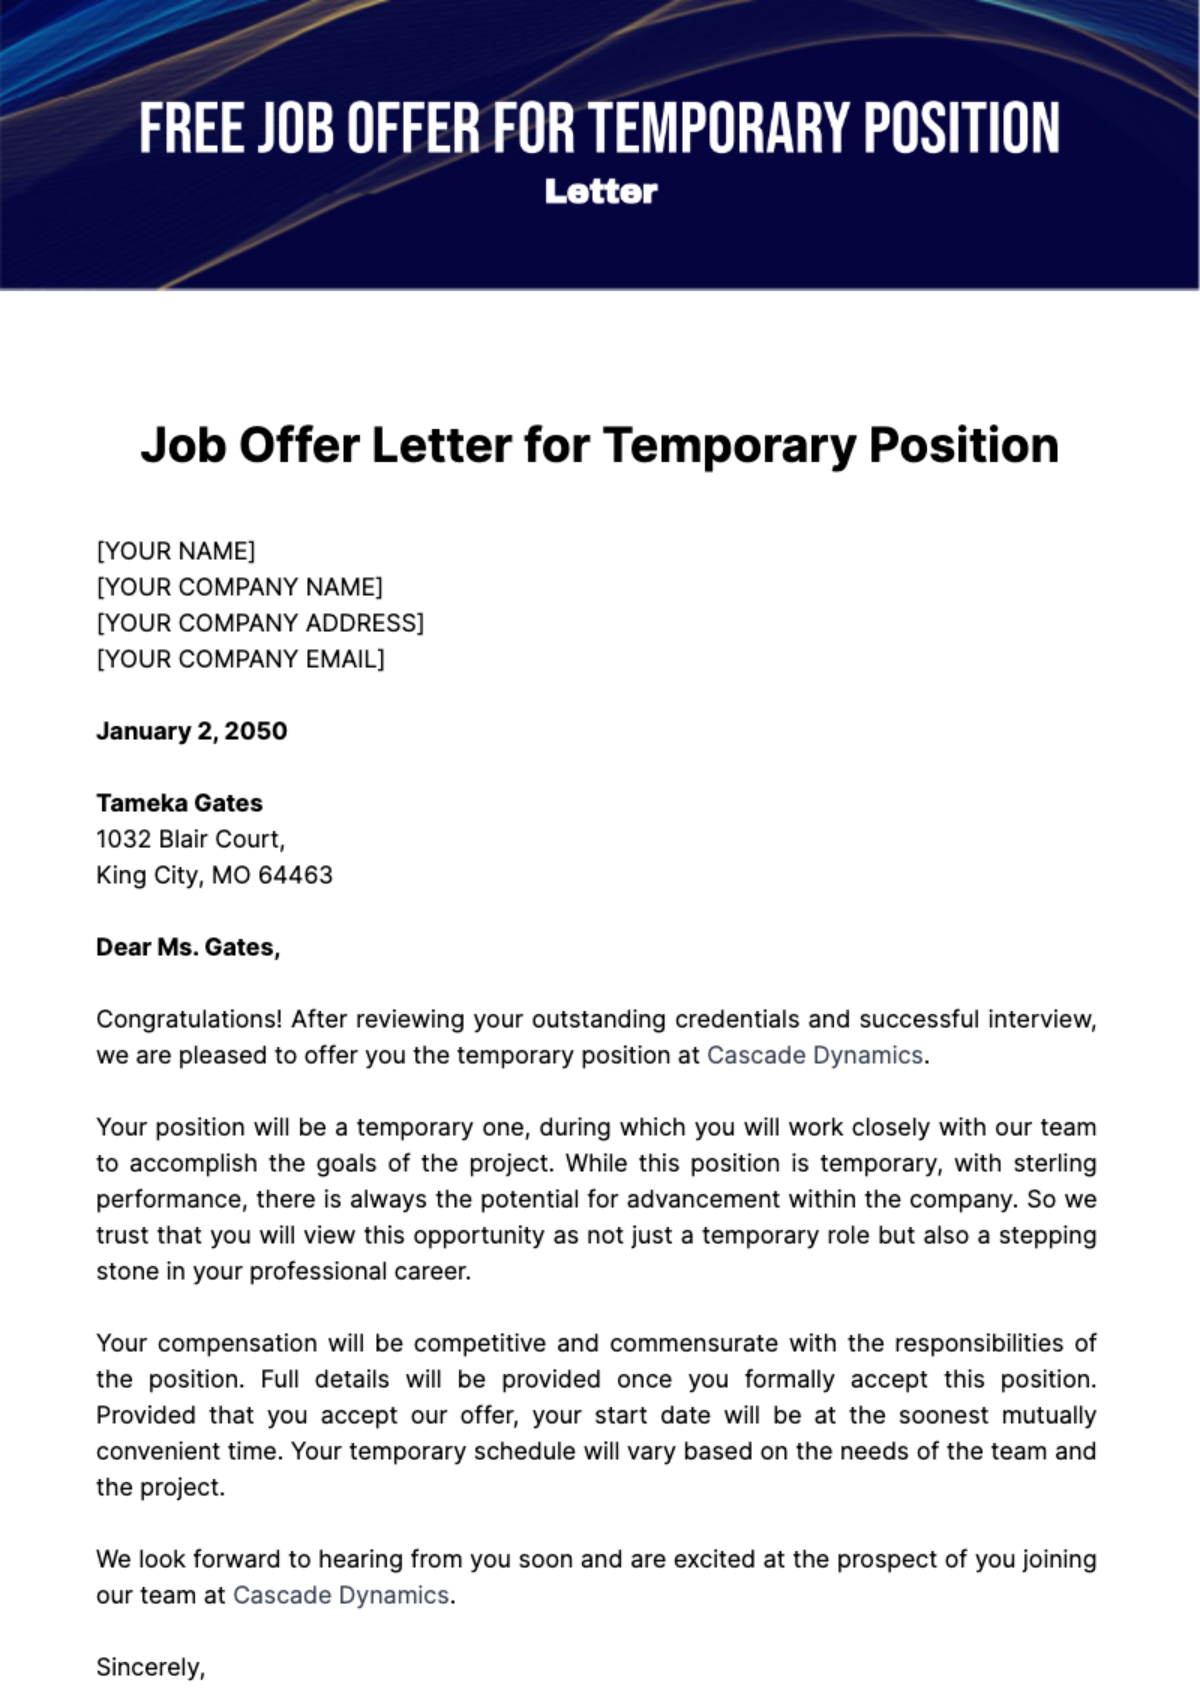 Free Job Offer Letter for Temporary Position Template